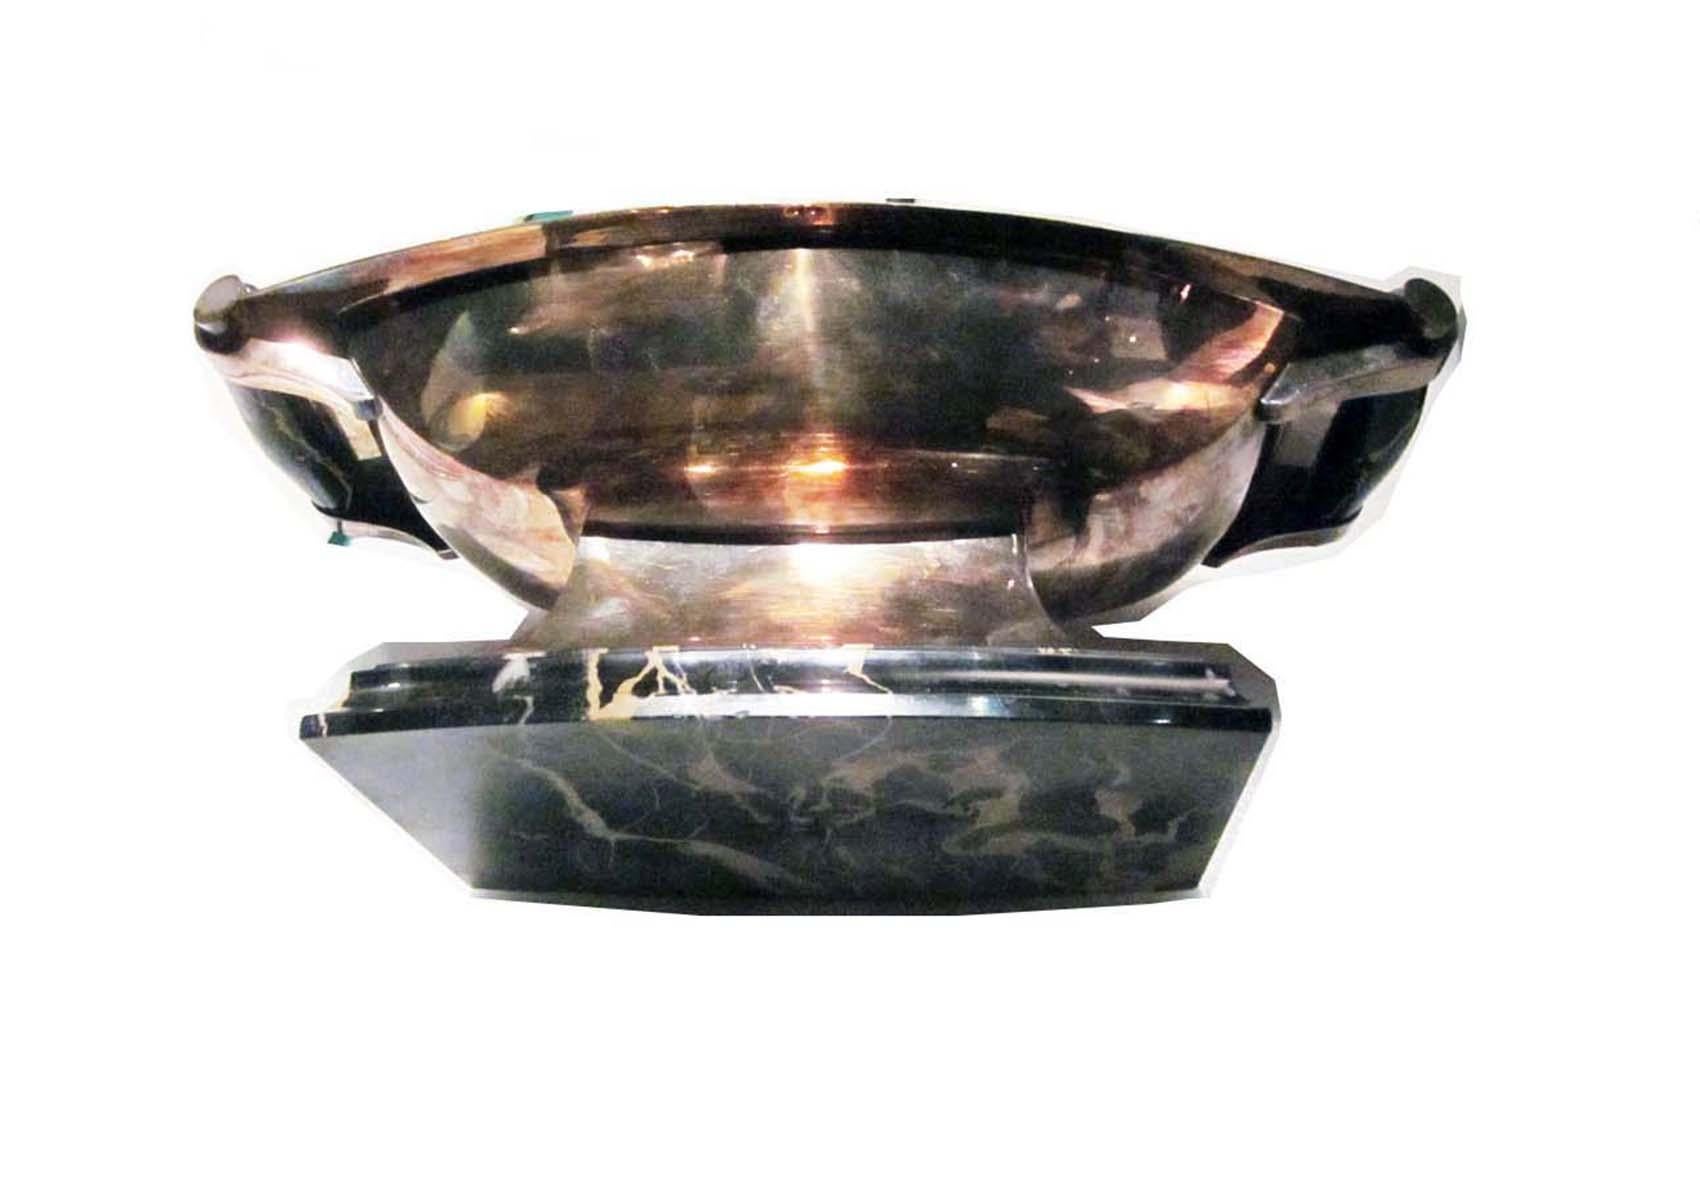 French Lovely Large Antique Art Deco Silver Serving Bowl with Tray, France, circa 1930